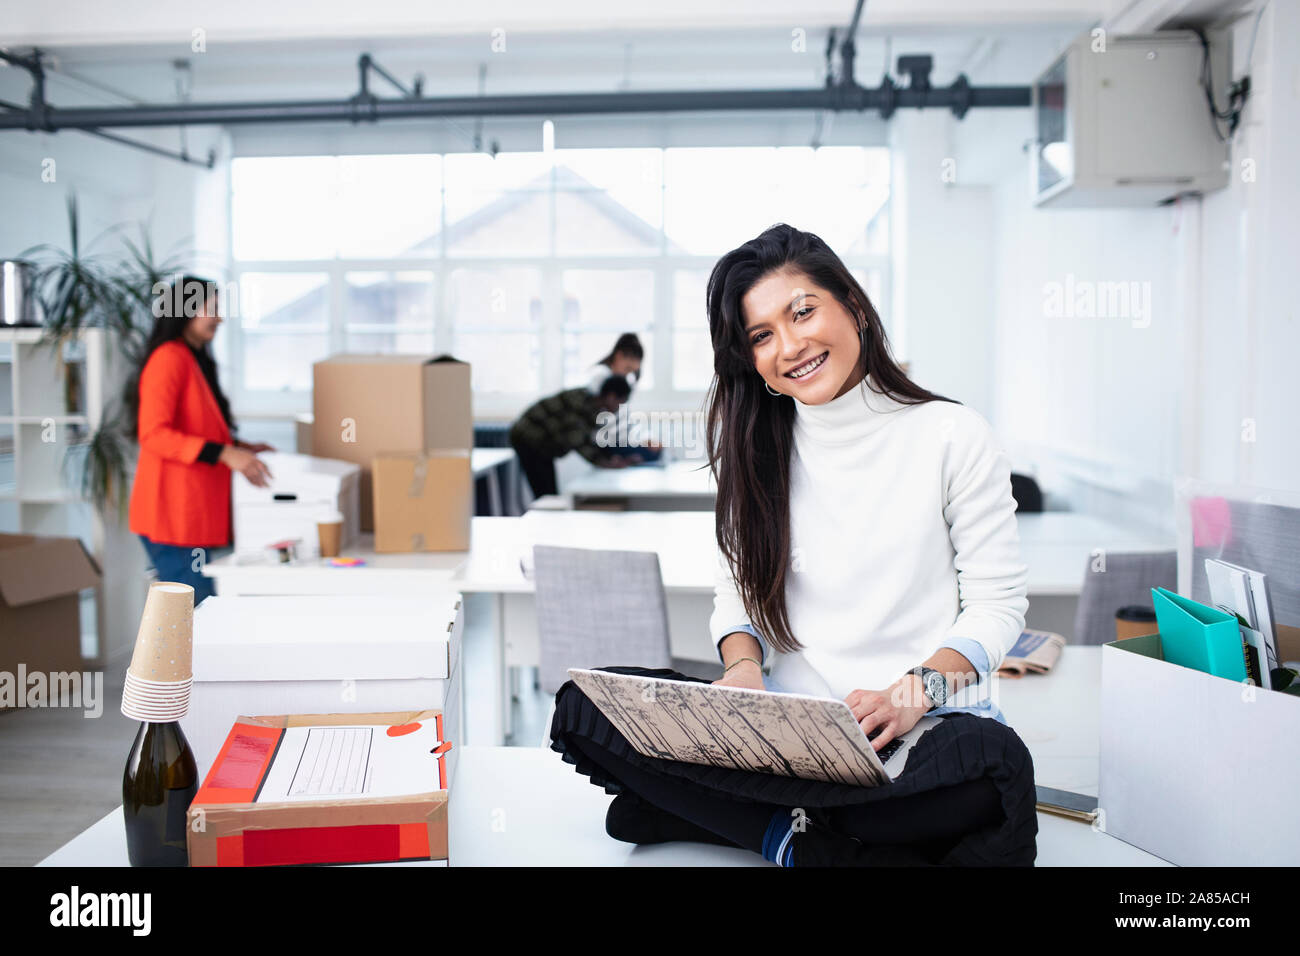 Portrait smiling, confident businesswoman using laptop in new office Stock Photo